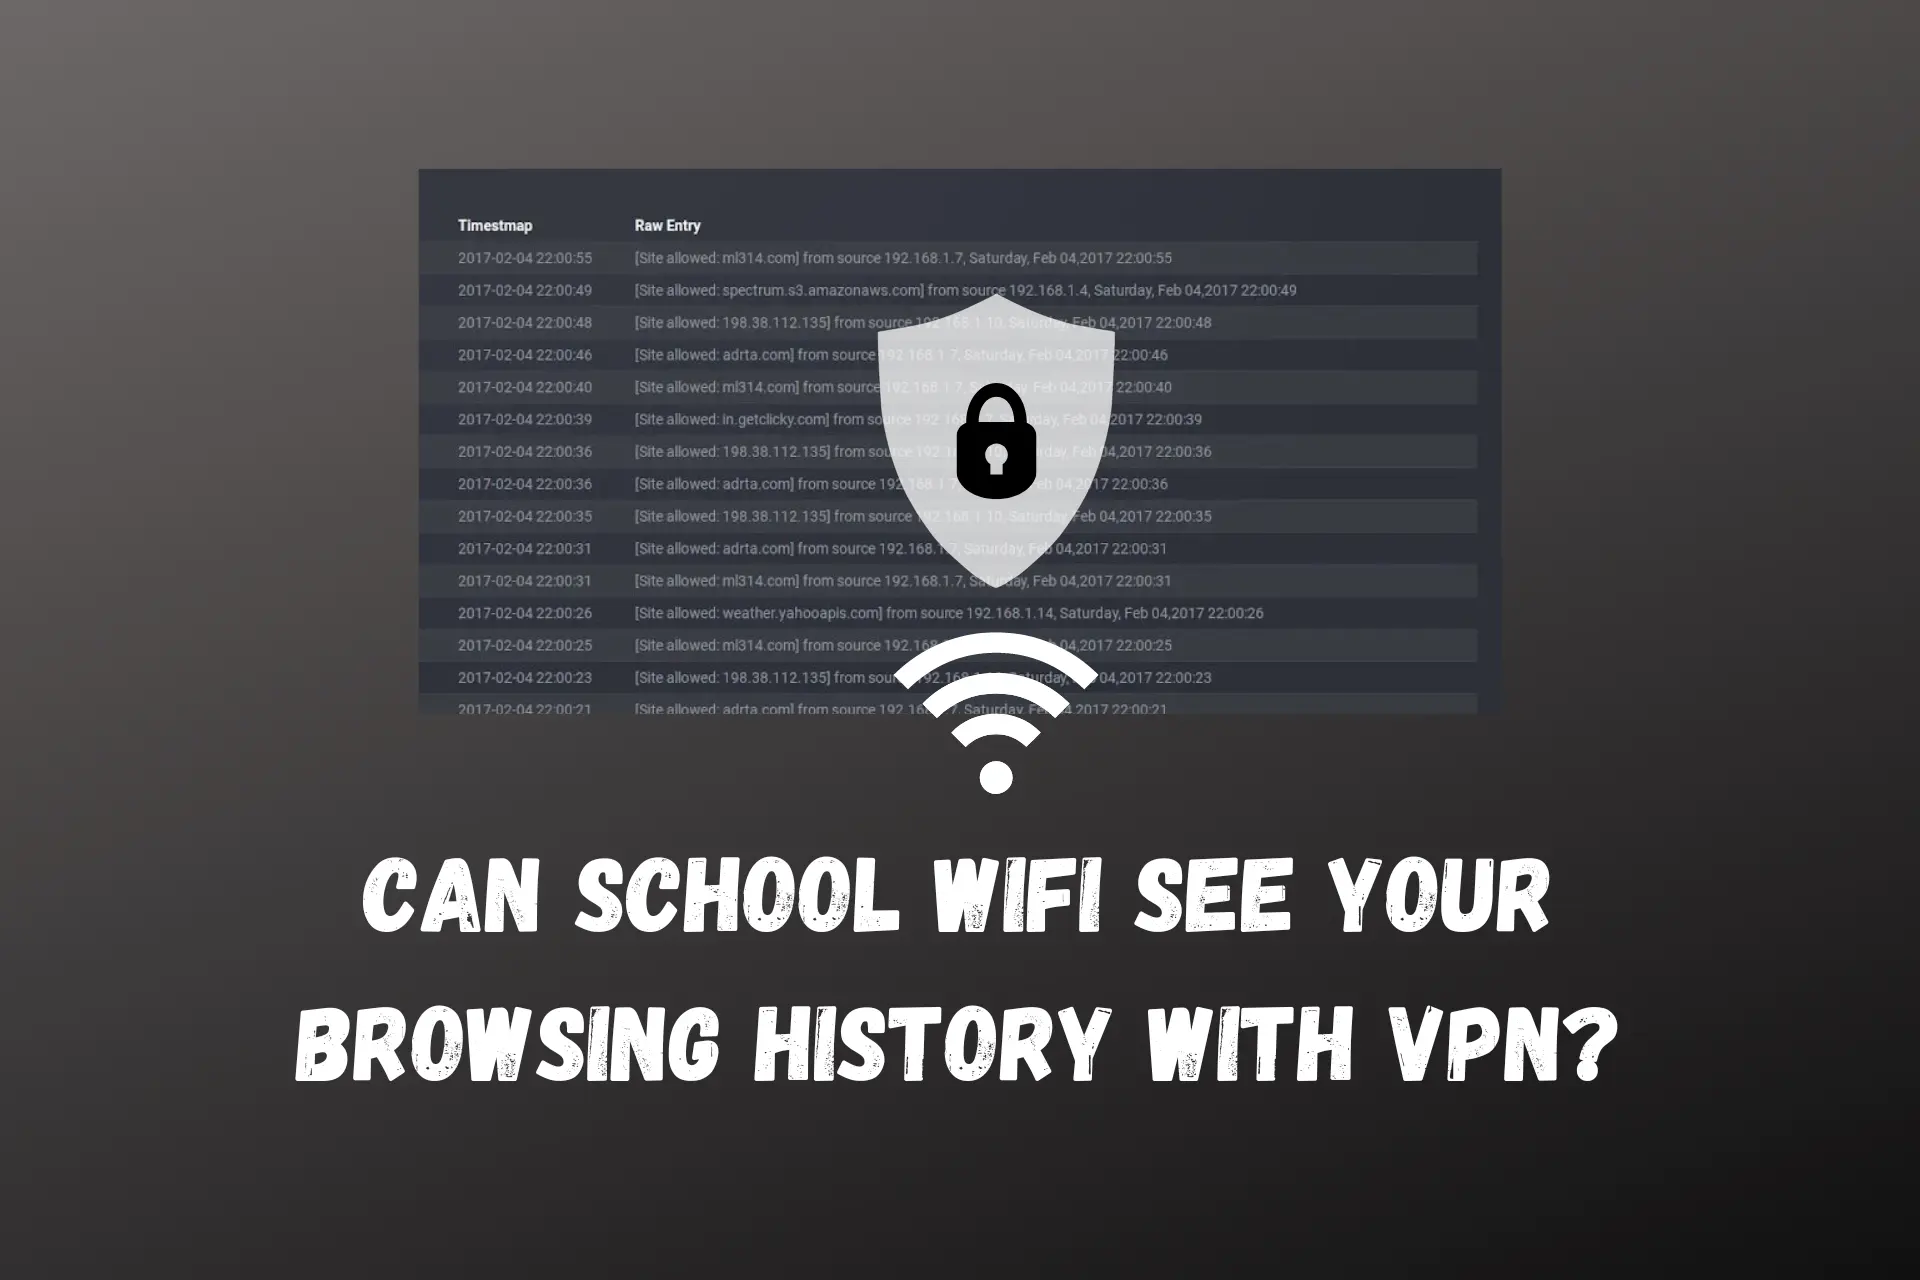 CAN SCHOOL WIFI SEE YOUR BROWSING HISTORY WITH VPN